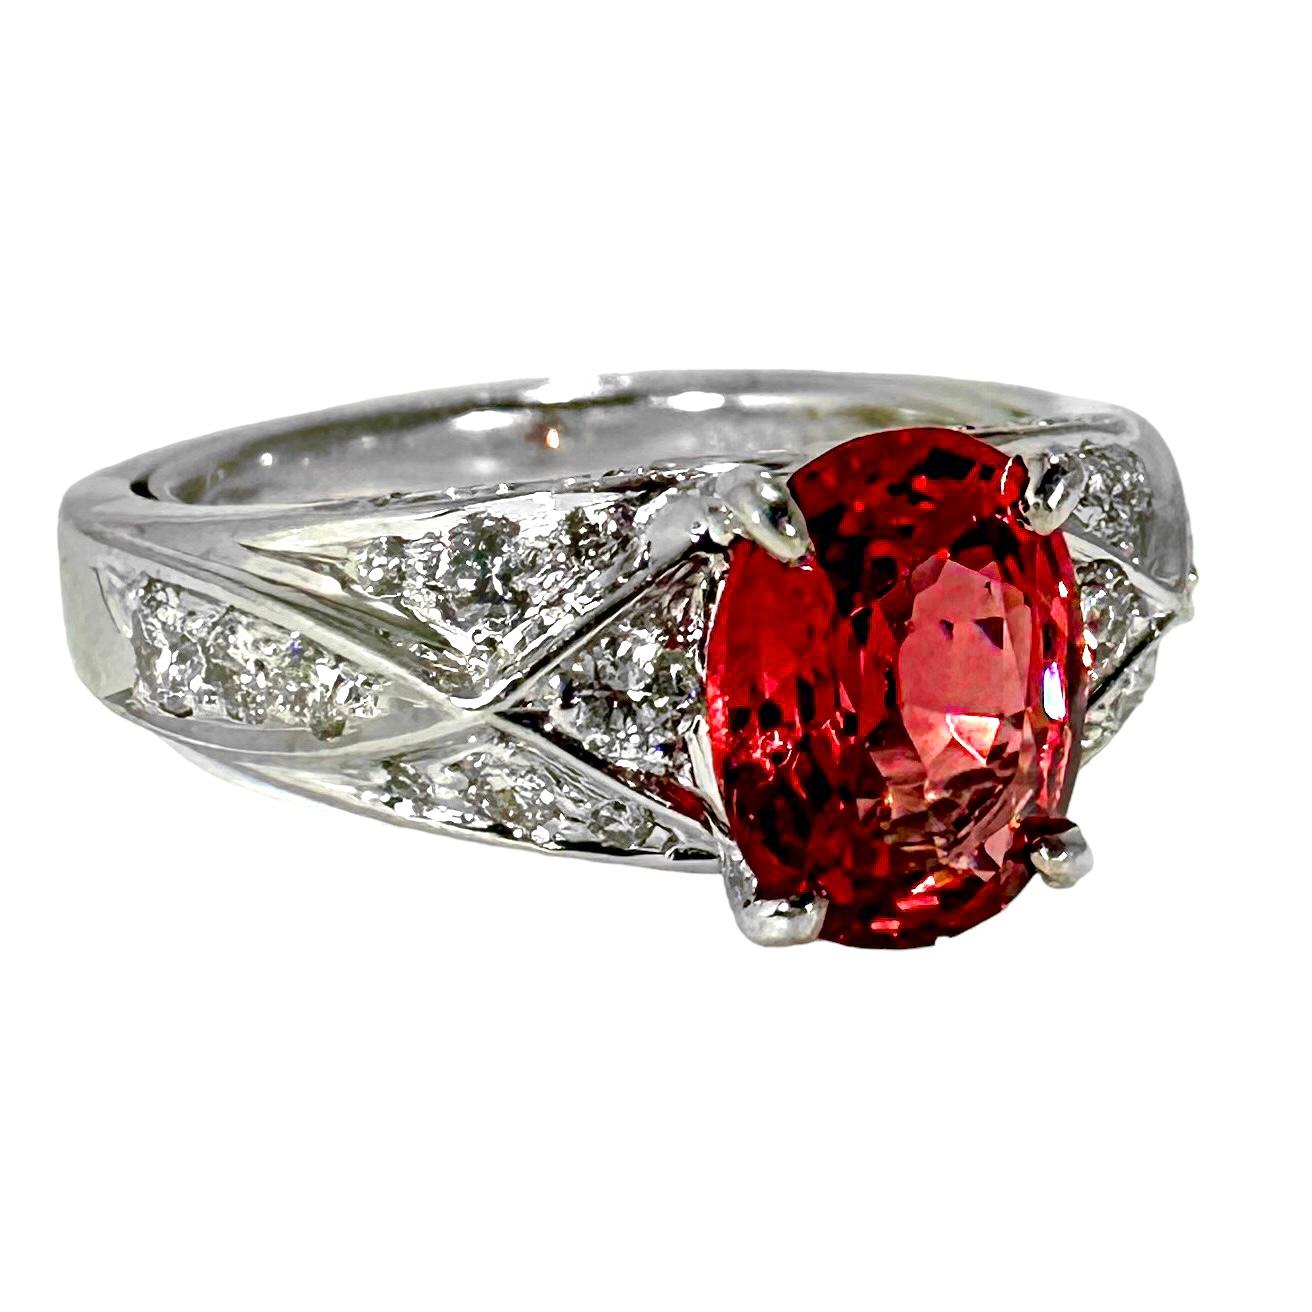 This truly rare and vivid 1.68ct.Burma Spinel is absolutely captivating when viewed in hand. The unusual and very vibrant color is the product of nature's creation alone, with no enhancement of any kind being performed on it by man. Often, gems of